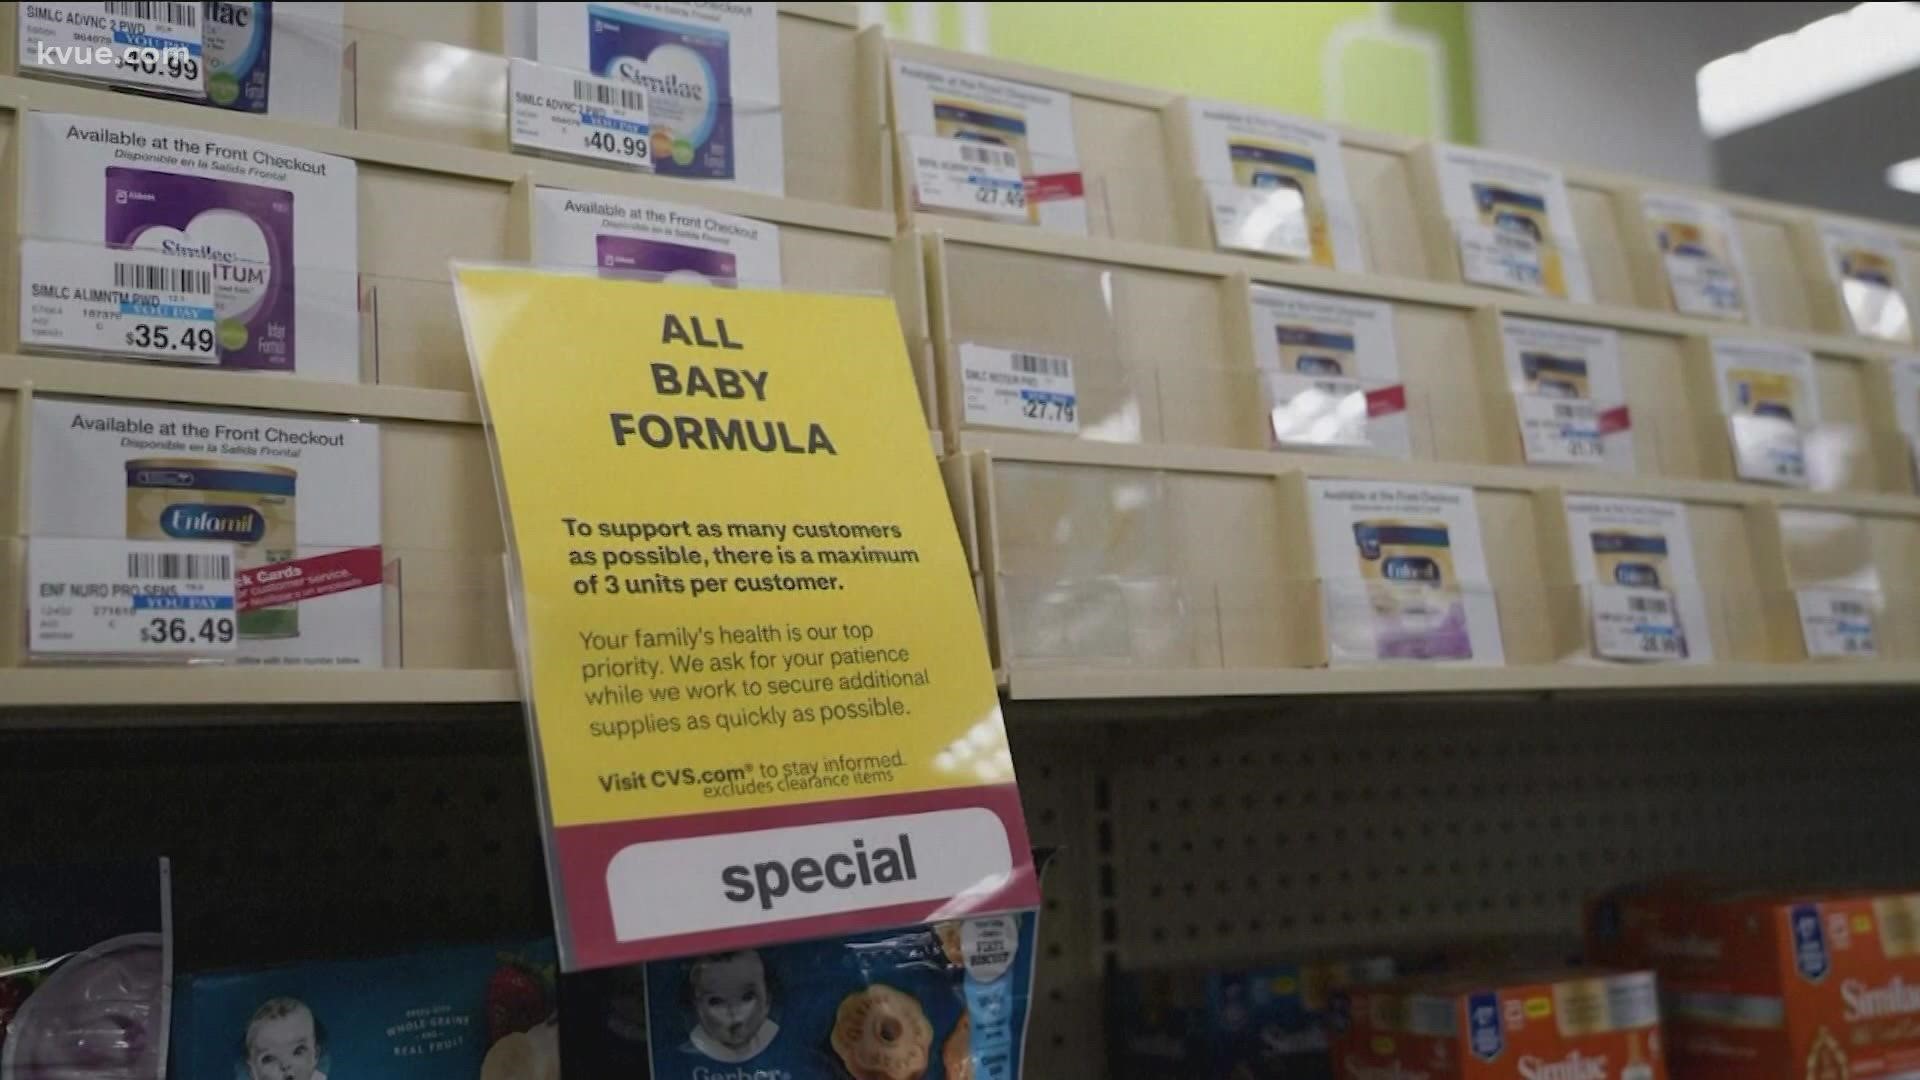 The worsening baby formula shortage is burdening so many families in the U.S. A group of Central Texas parents is doing something about it.